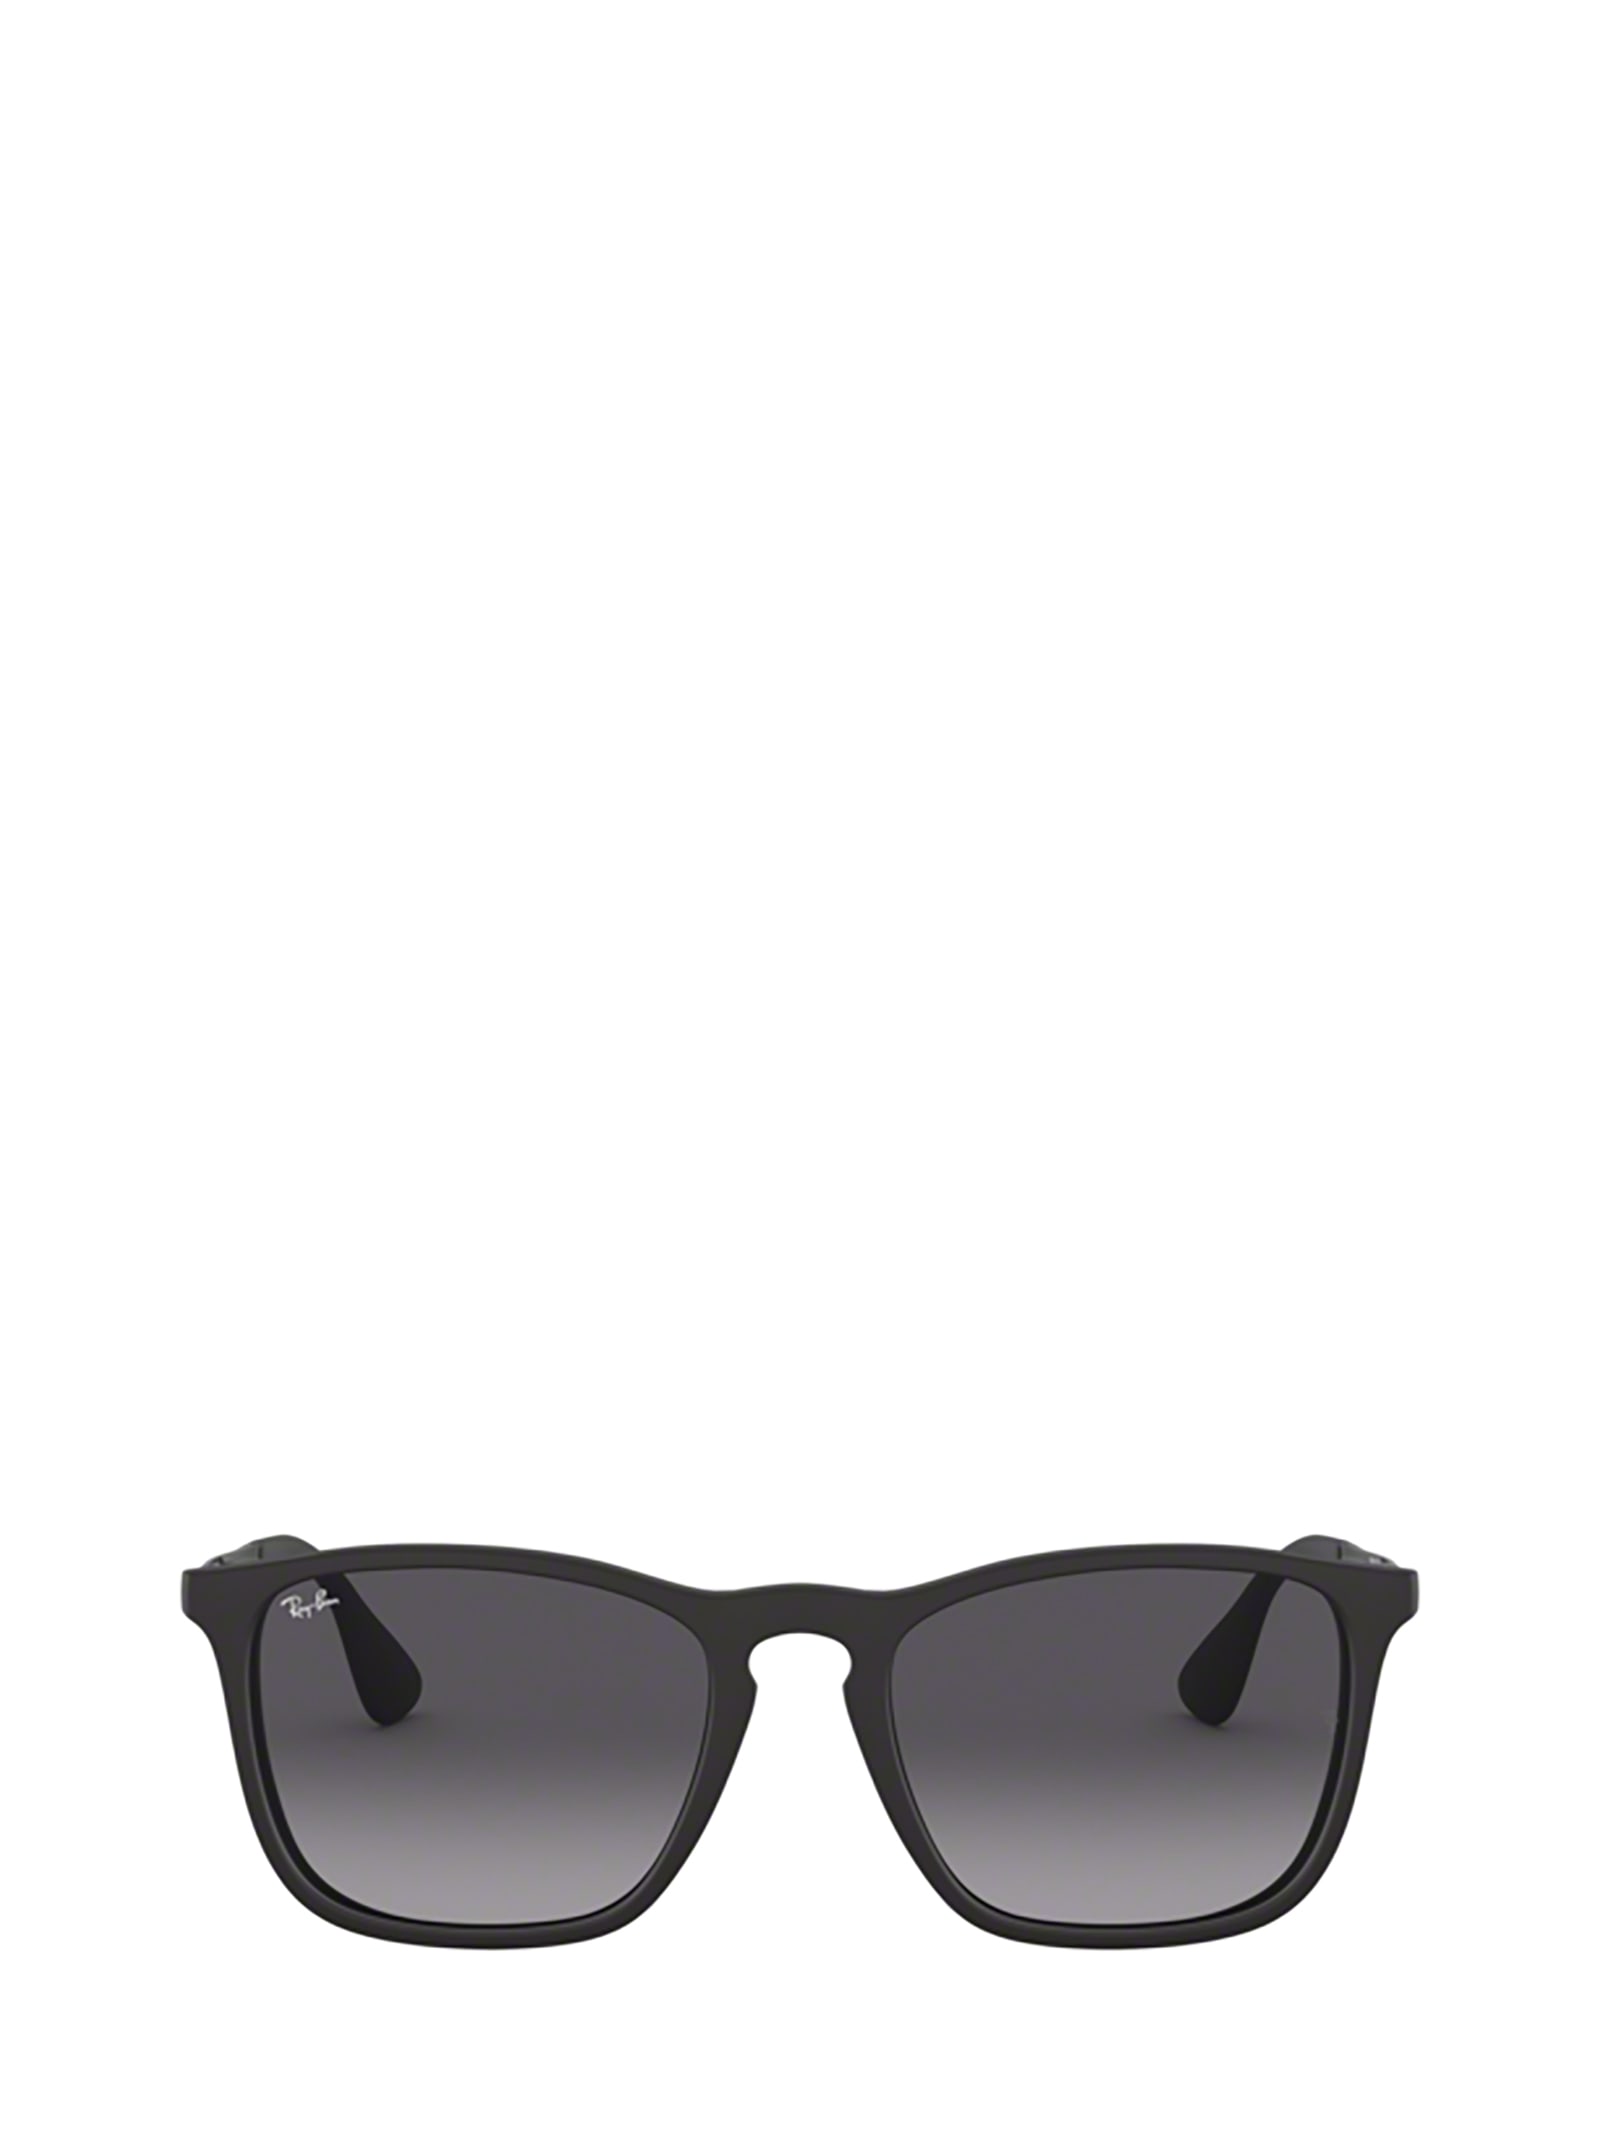 RAY BAN RB4187 RUBBER BLACK SUNGLASSES